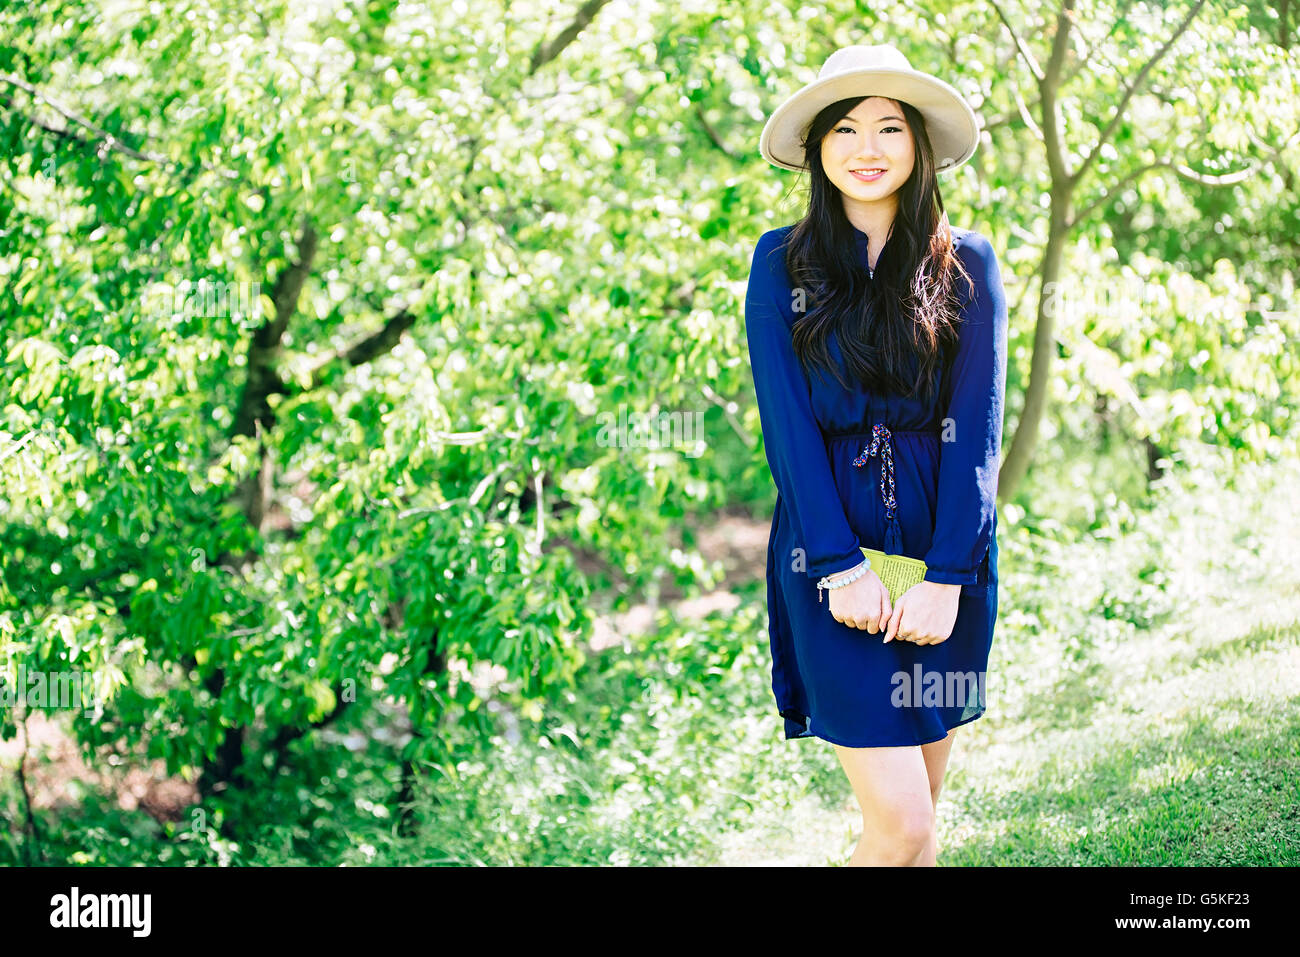 Chinese woman standing in garden Stock Photo